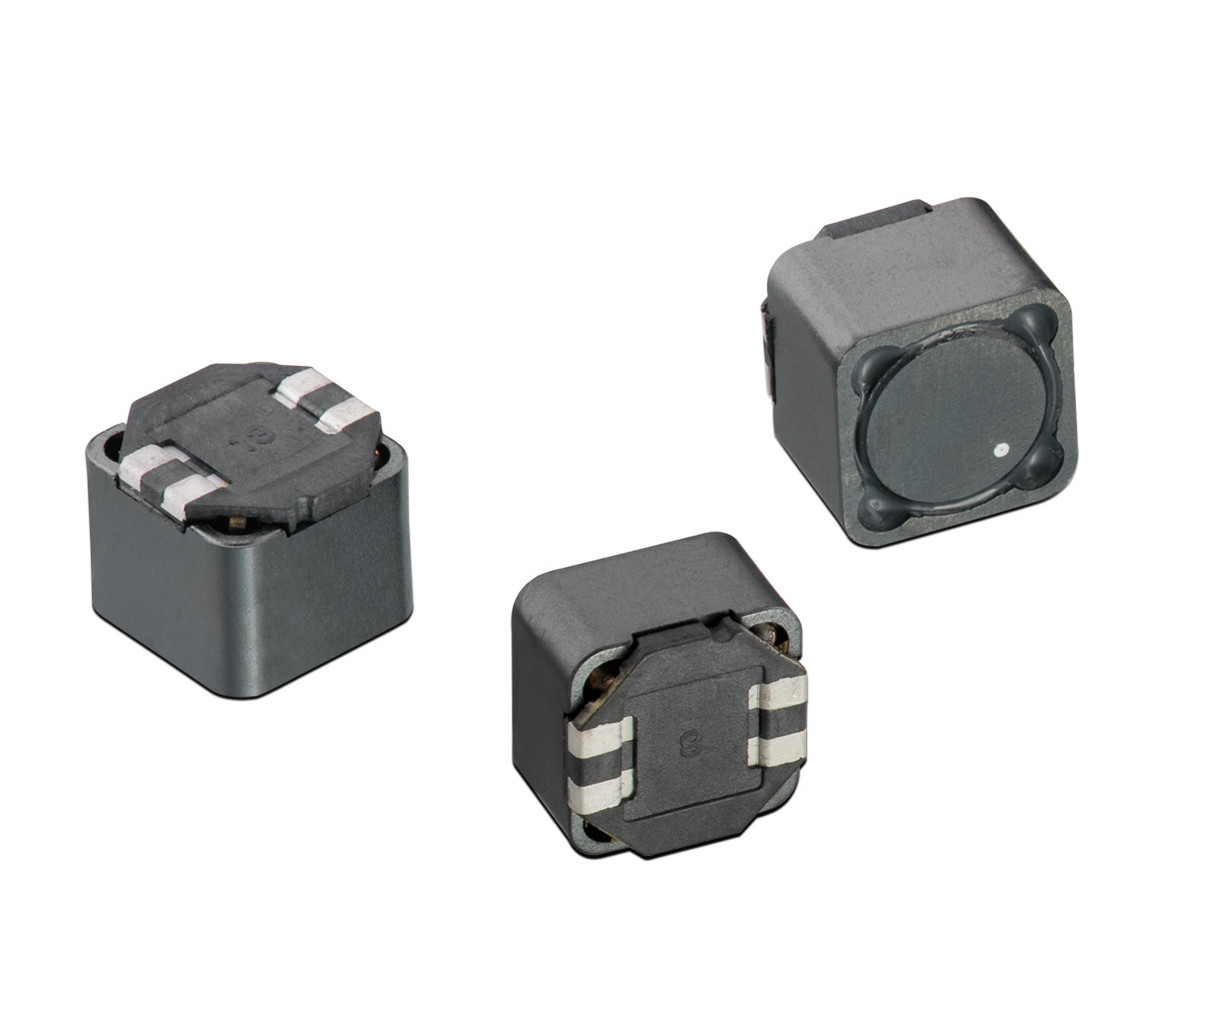  PDRH74D Series 1.8uH~100uH Square High quality competitive shielded SMD Power Inductors Replace Wurth744877 series Manufactures